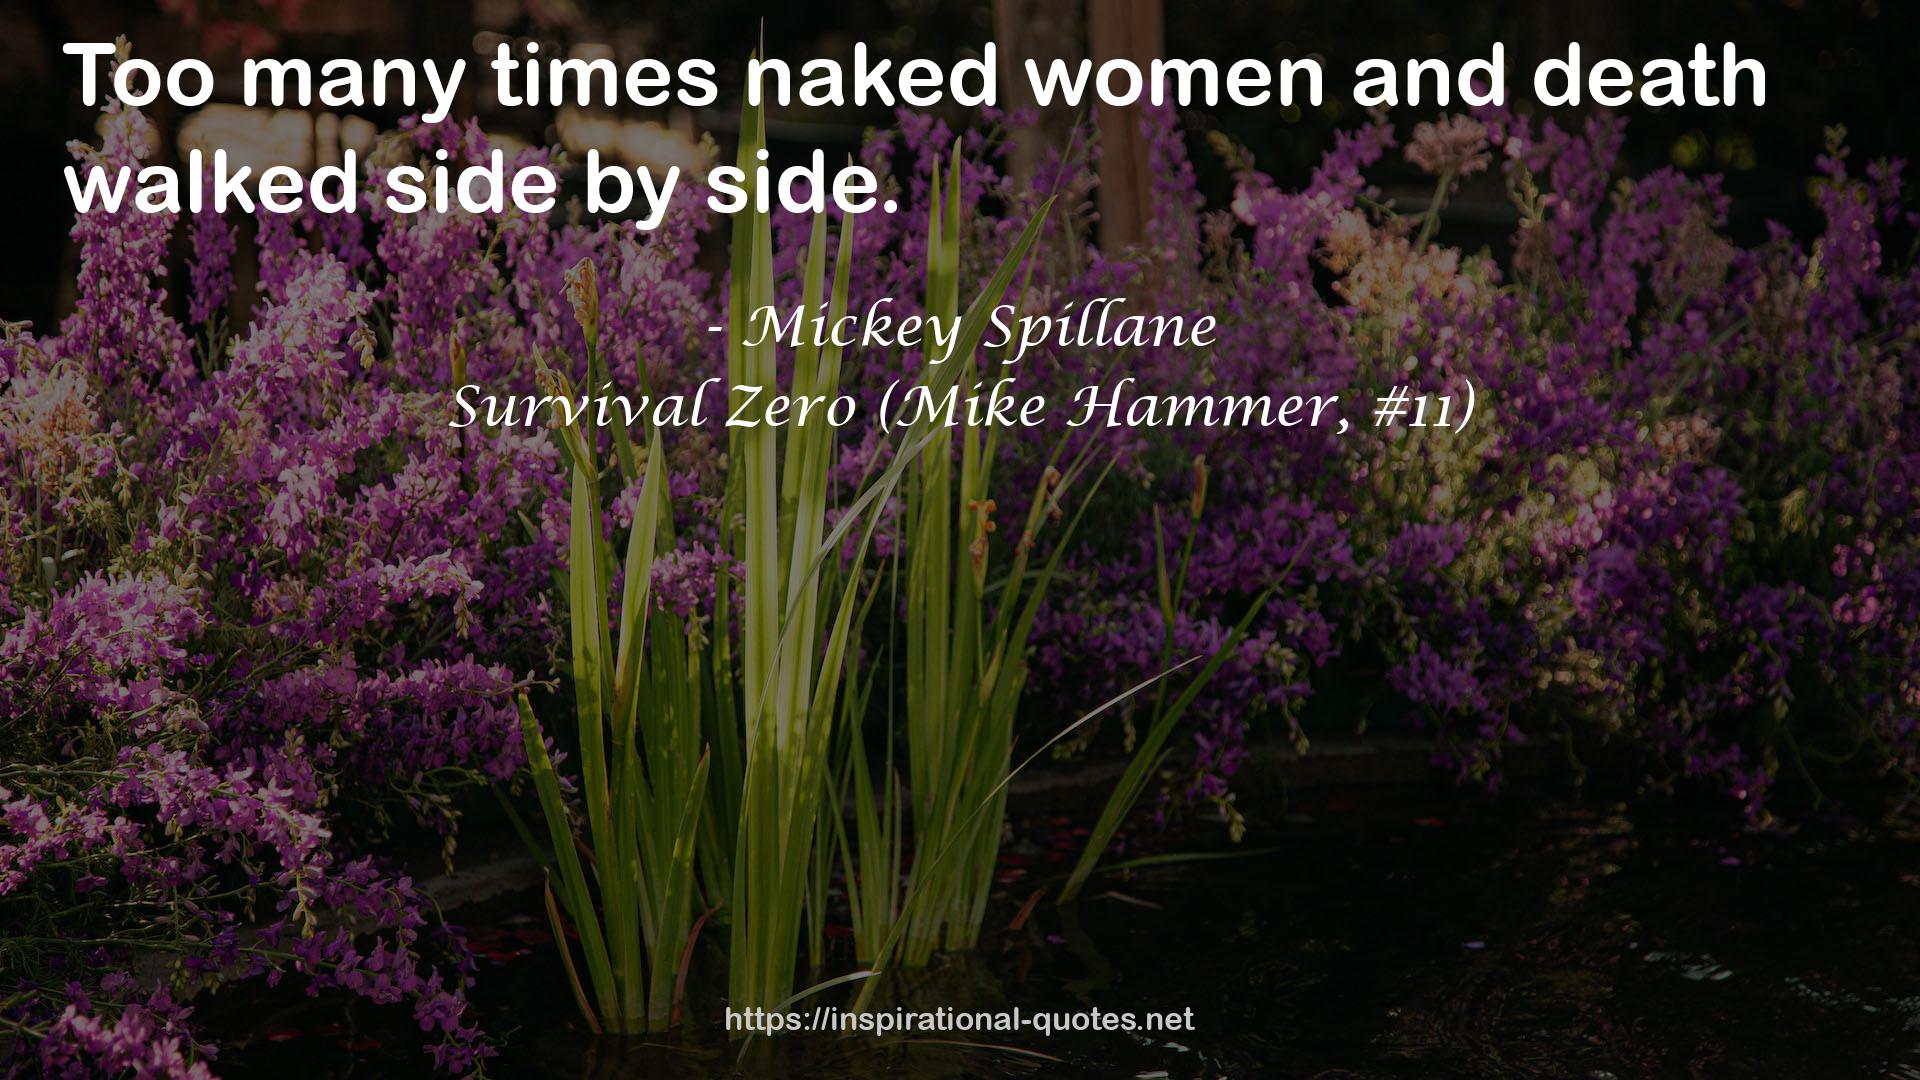 Survival Zero (Mike Hammer, #11) QUOTES